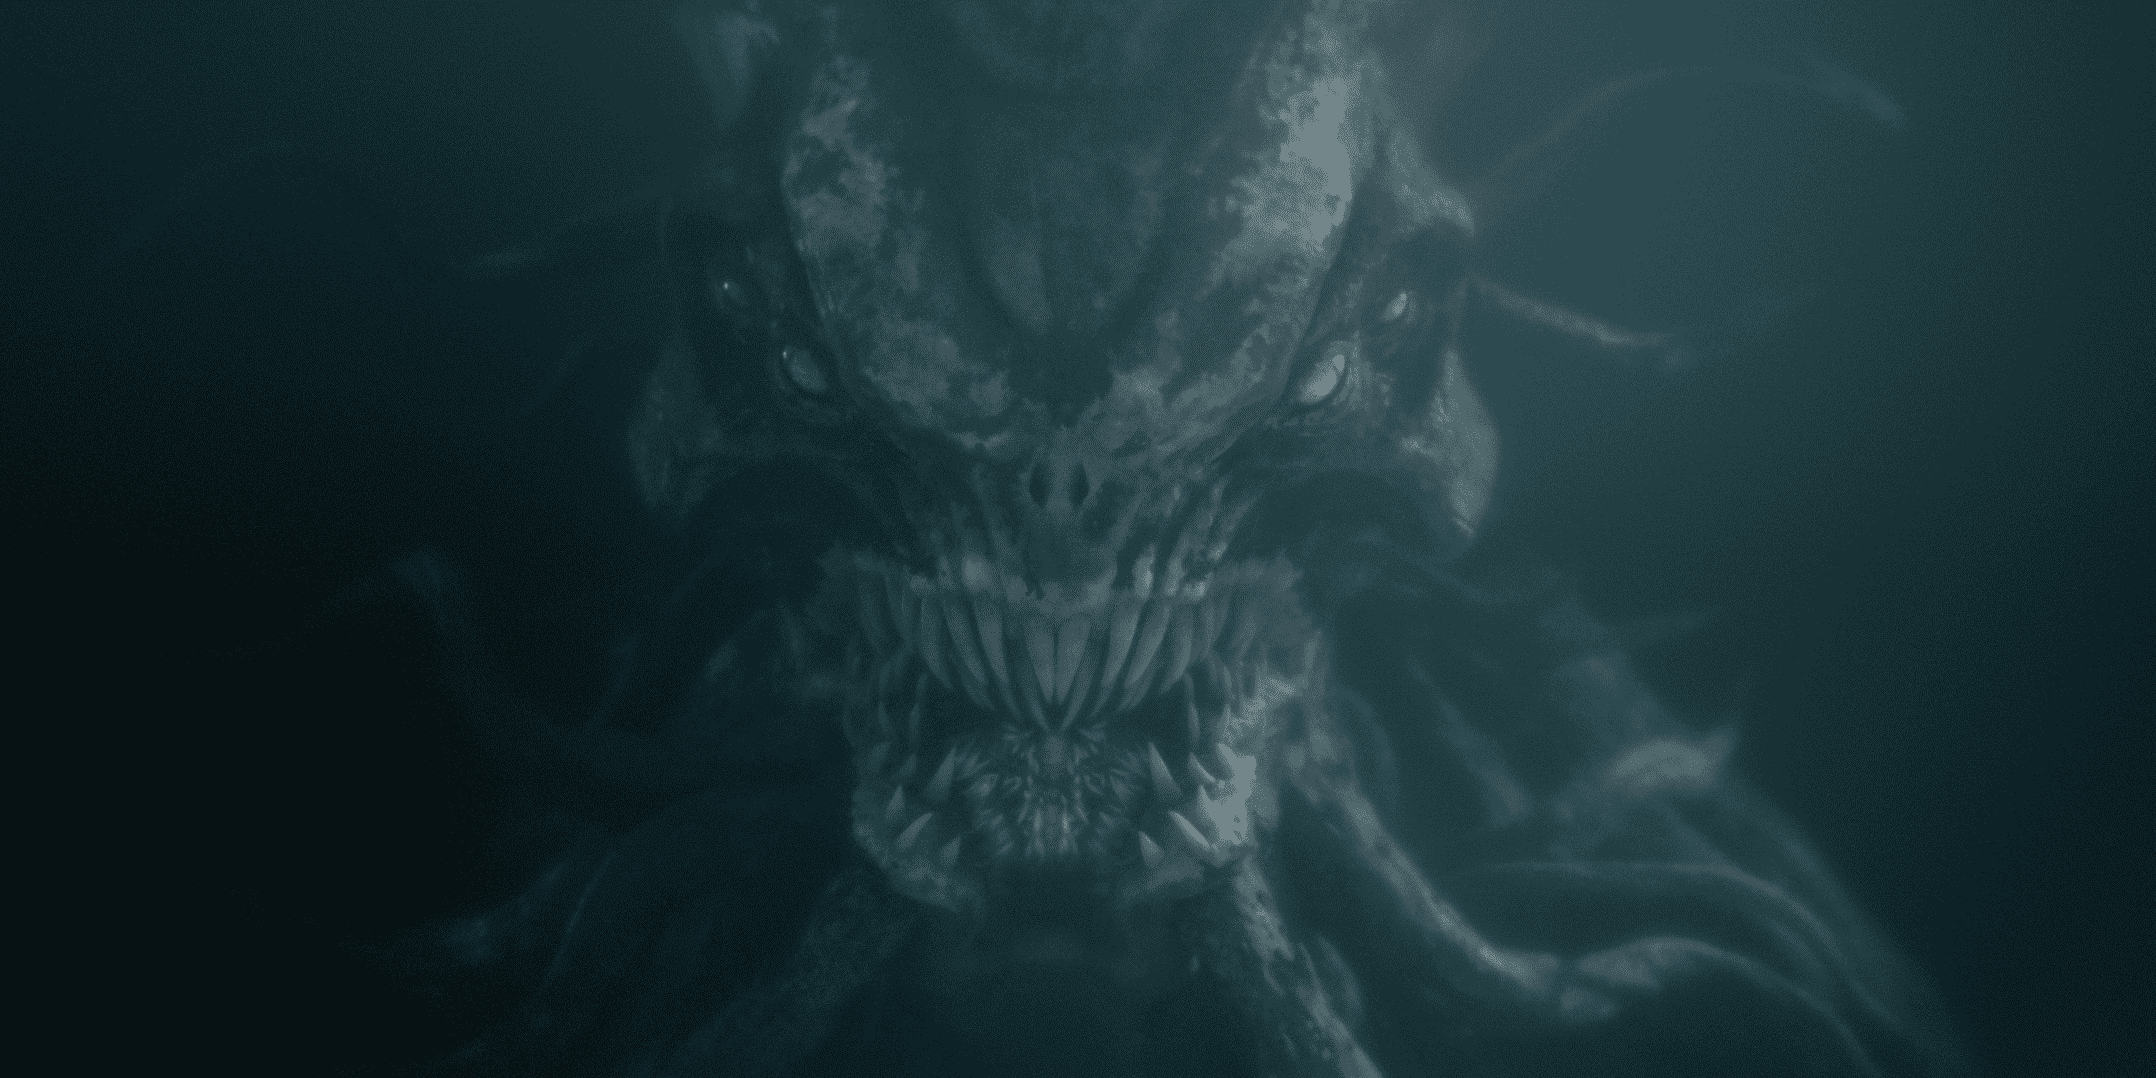 Cthulhu from Underwater (2020)